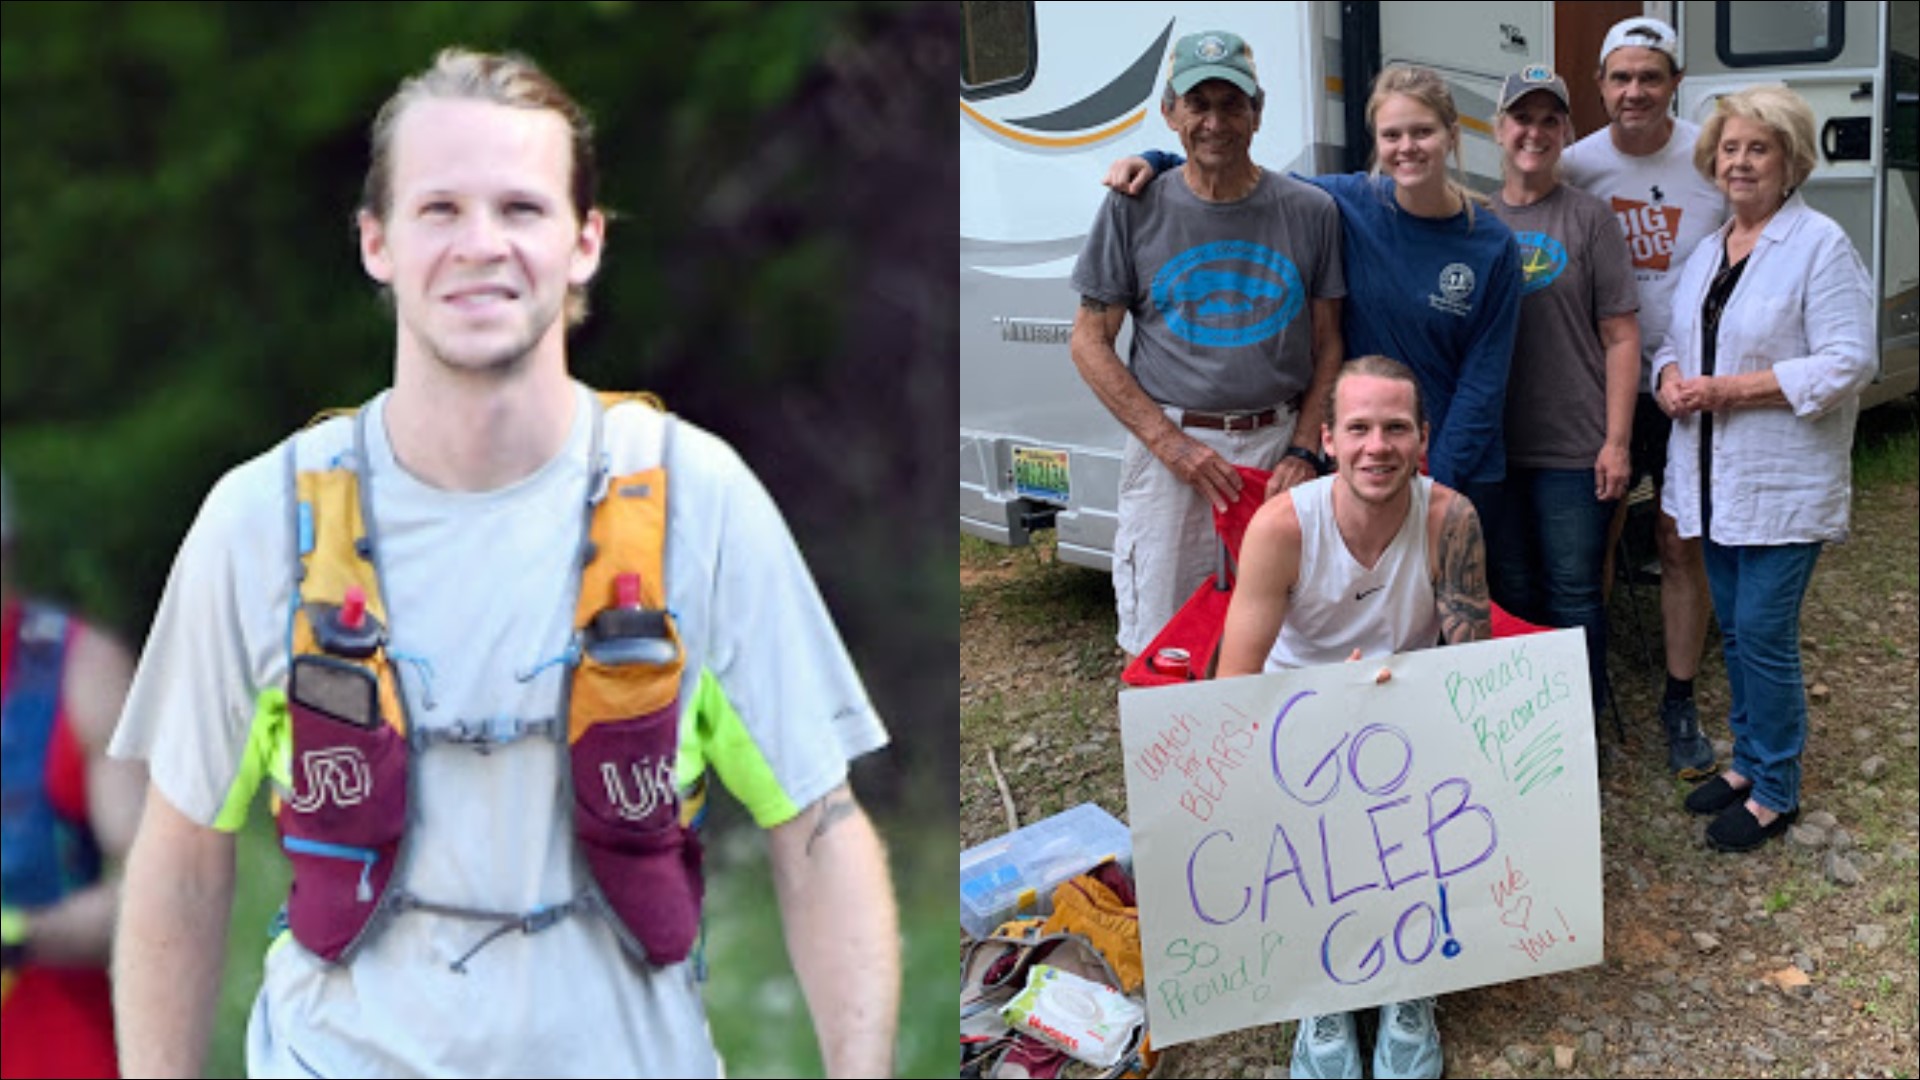 28-year-old Caleb Yawn took five days, 13 hours, 21 minutes and 43 seconds to run almost 350 miles from Alabama to Georgia.